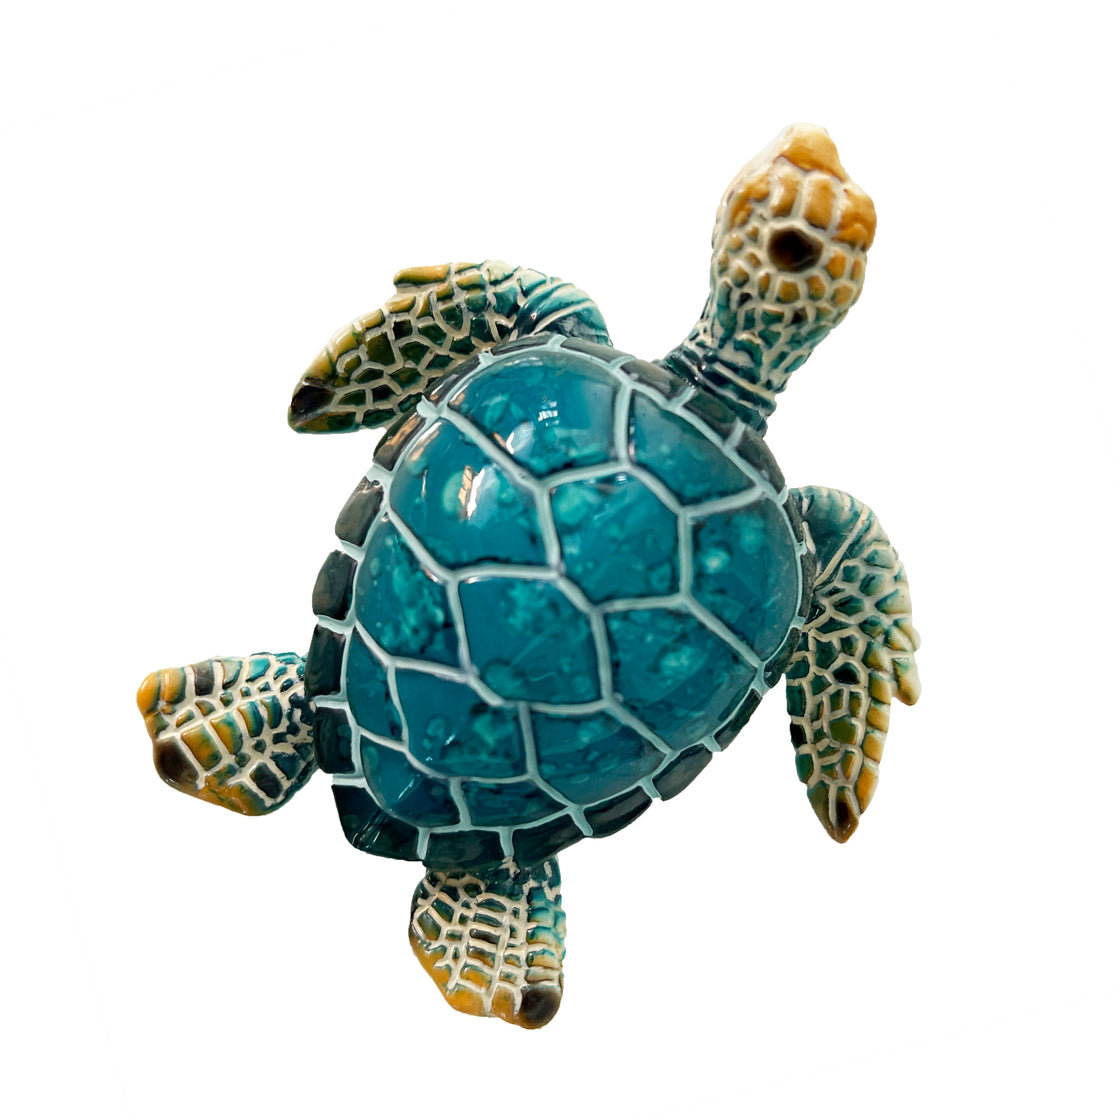 This small, decorative magnet features the likeness of a turtle, painted in a pleasing shade of blue. Its smooth, glossy surface and well-defined turtle shape give it a delightful and eye-catching appearance by rengora